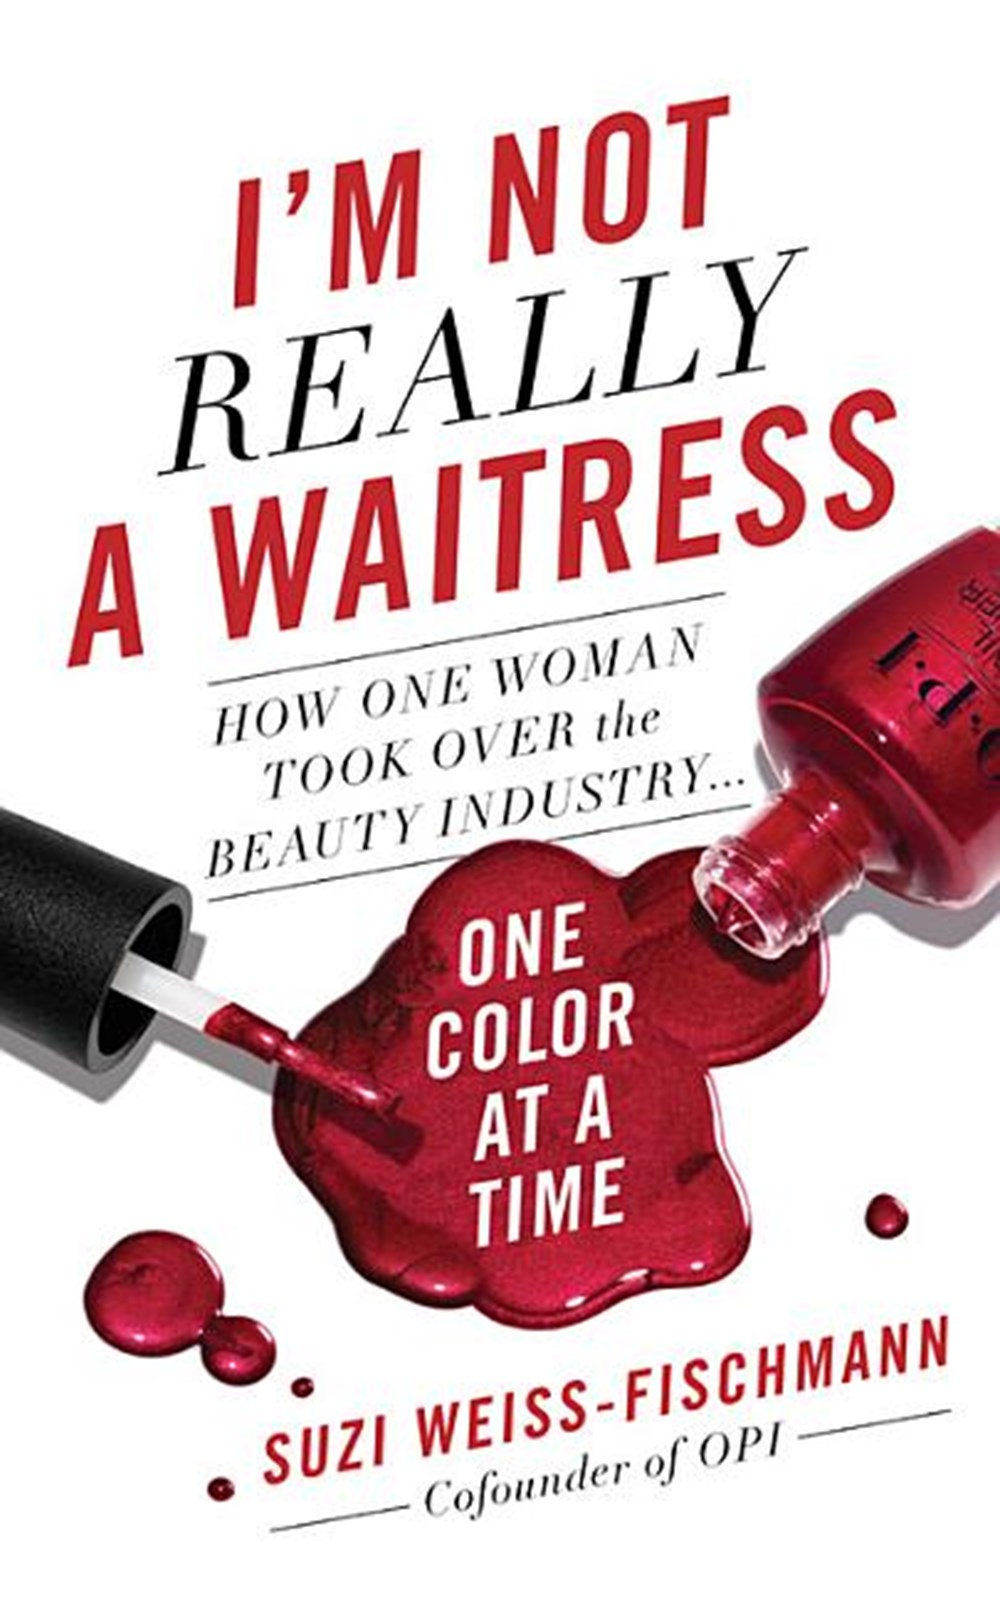 I'm Not Really a Waitress How One Woman Took Over the Beauty Industry One Color at a Time